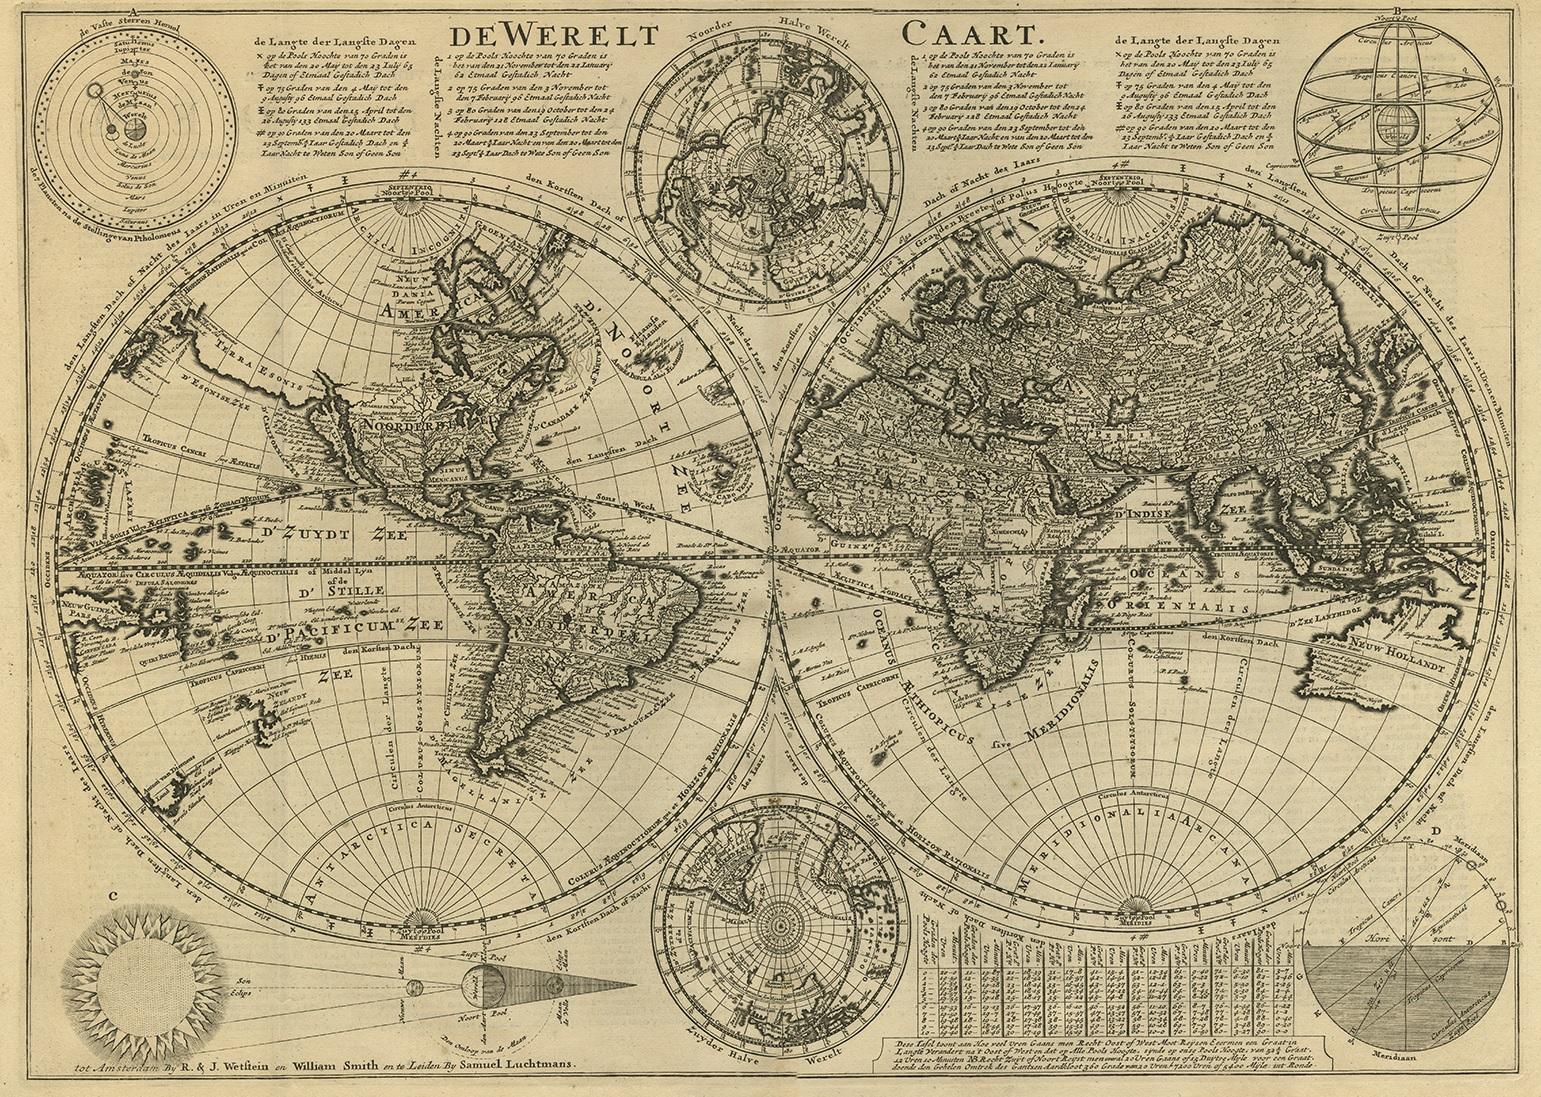 Antique world map titled 'De Werelt Caart'. 

A scarce and richly detailed double hemisphere world map that was probably based on an earlier work by Cornelis Dankerts. This map has two small inset polar hemisphere maps and astronomical diagrams. The